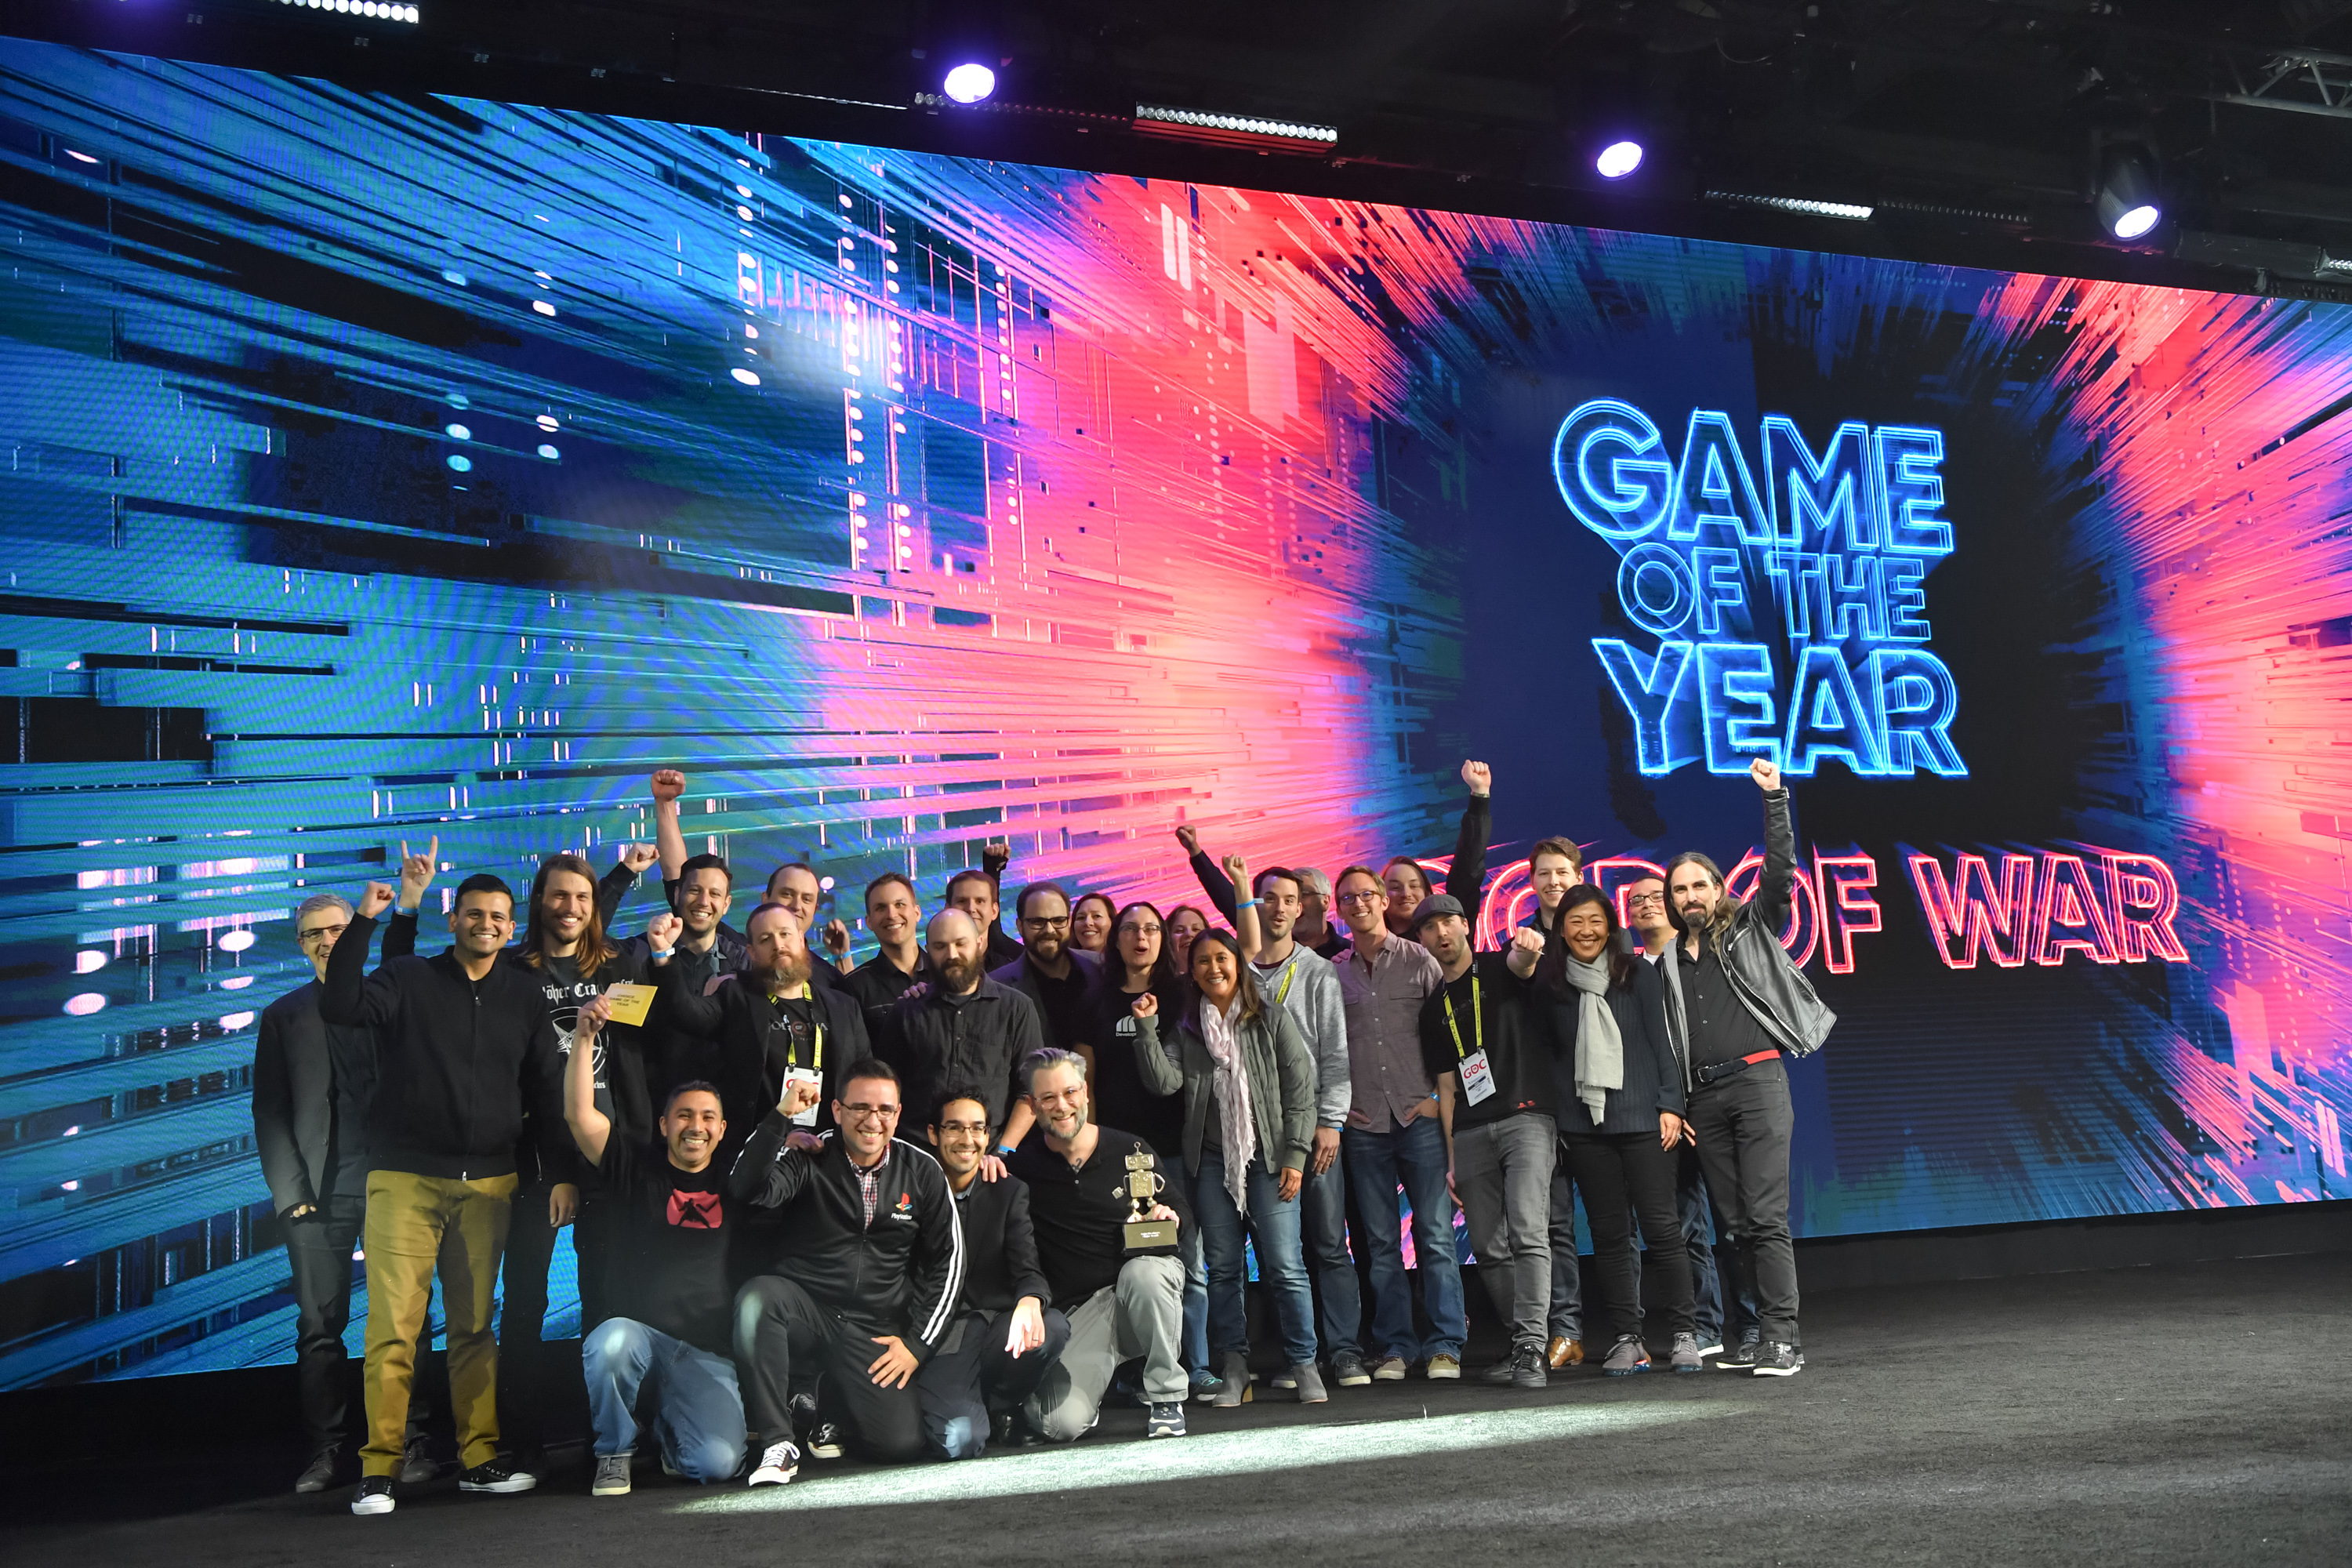 Evolution Game of the Year Winner by The Game Awards (2000 - 2019)